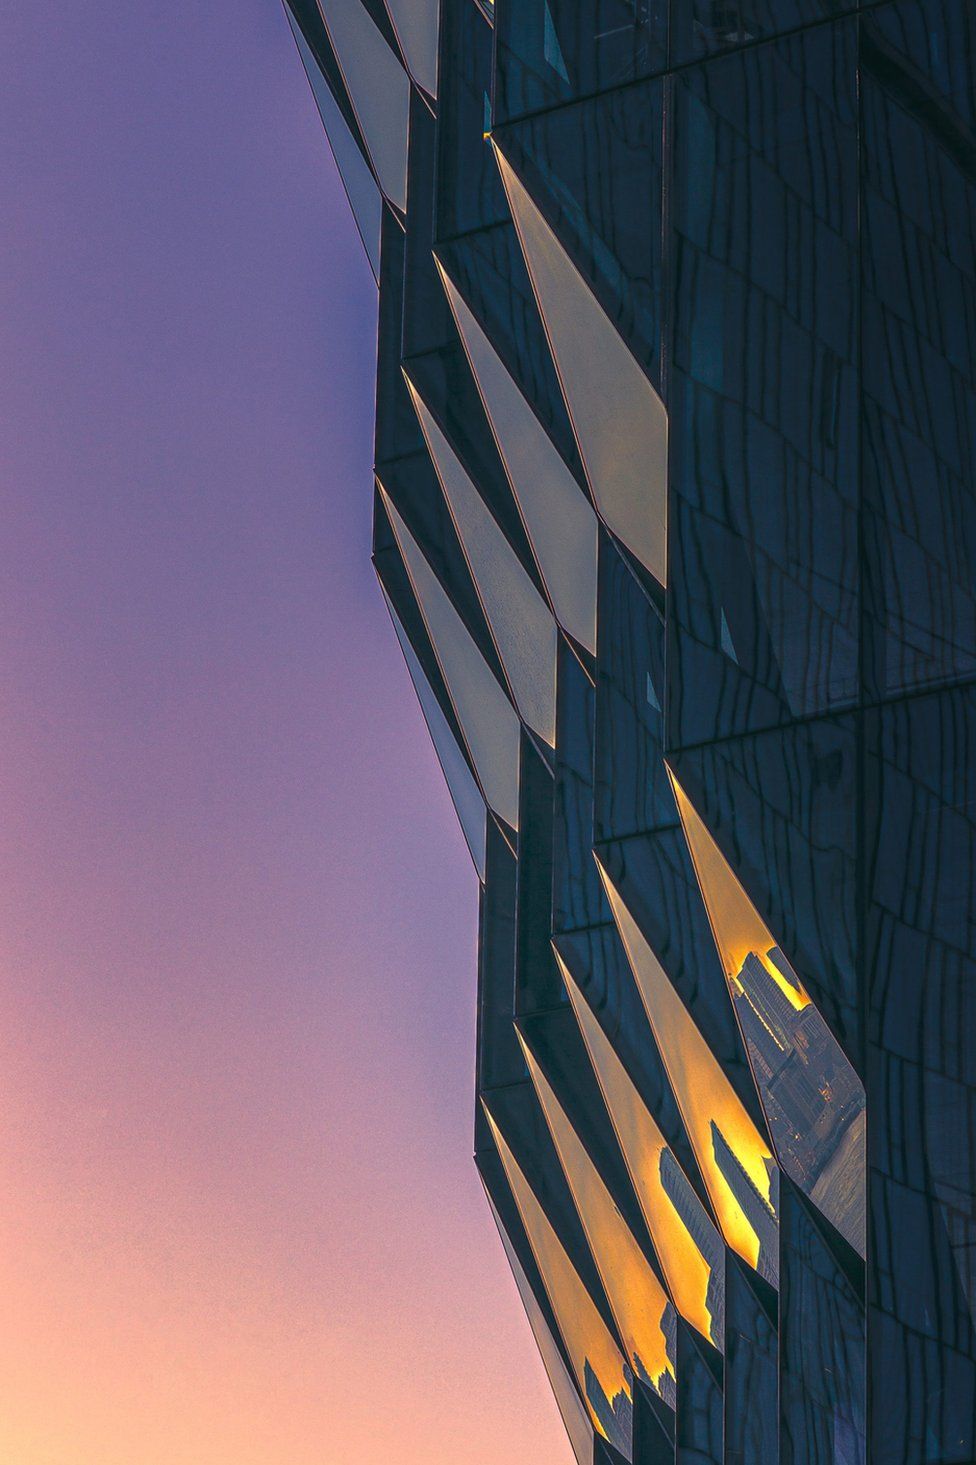 Sunset on a building in New York, USA